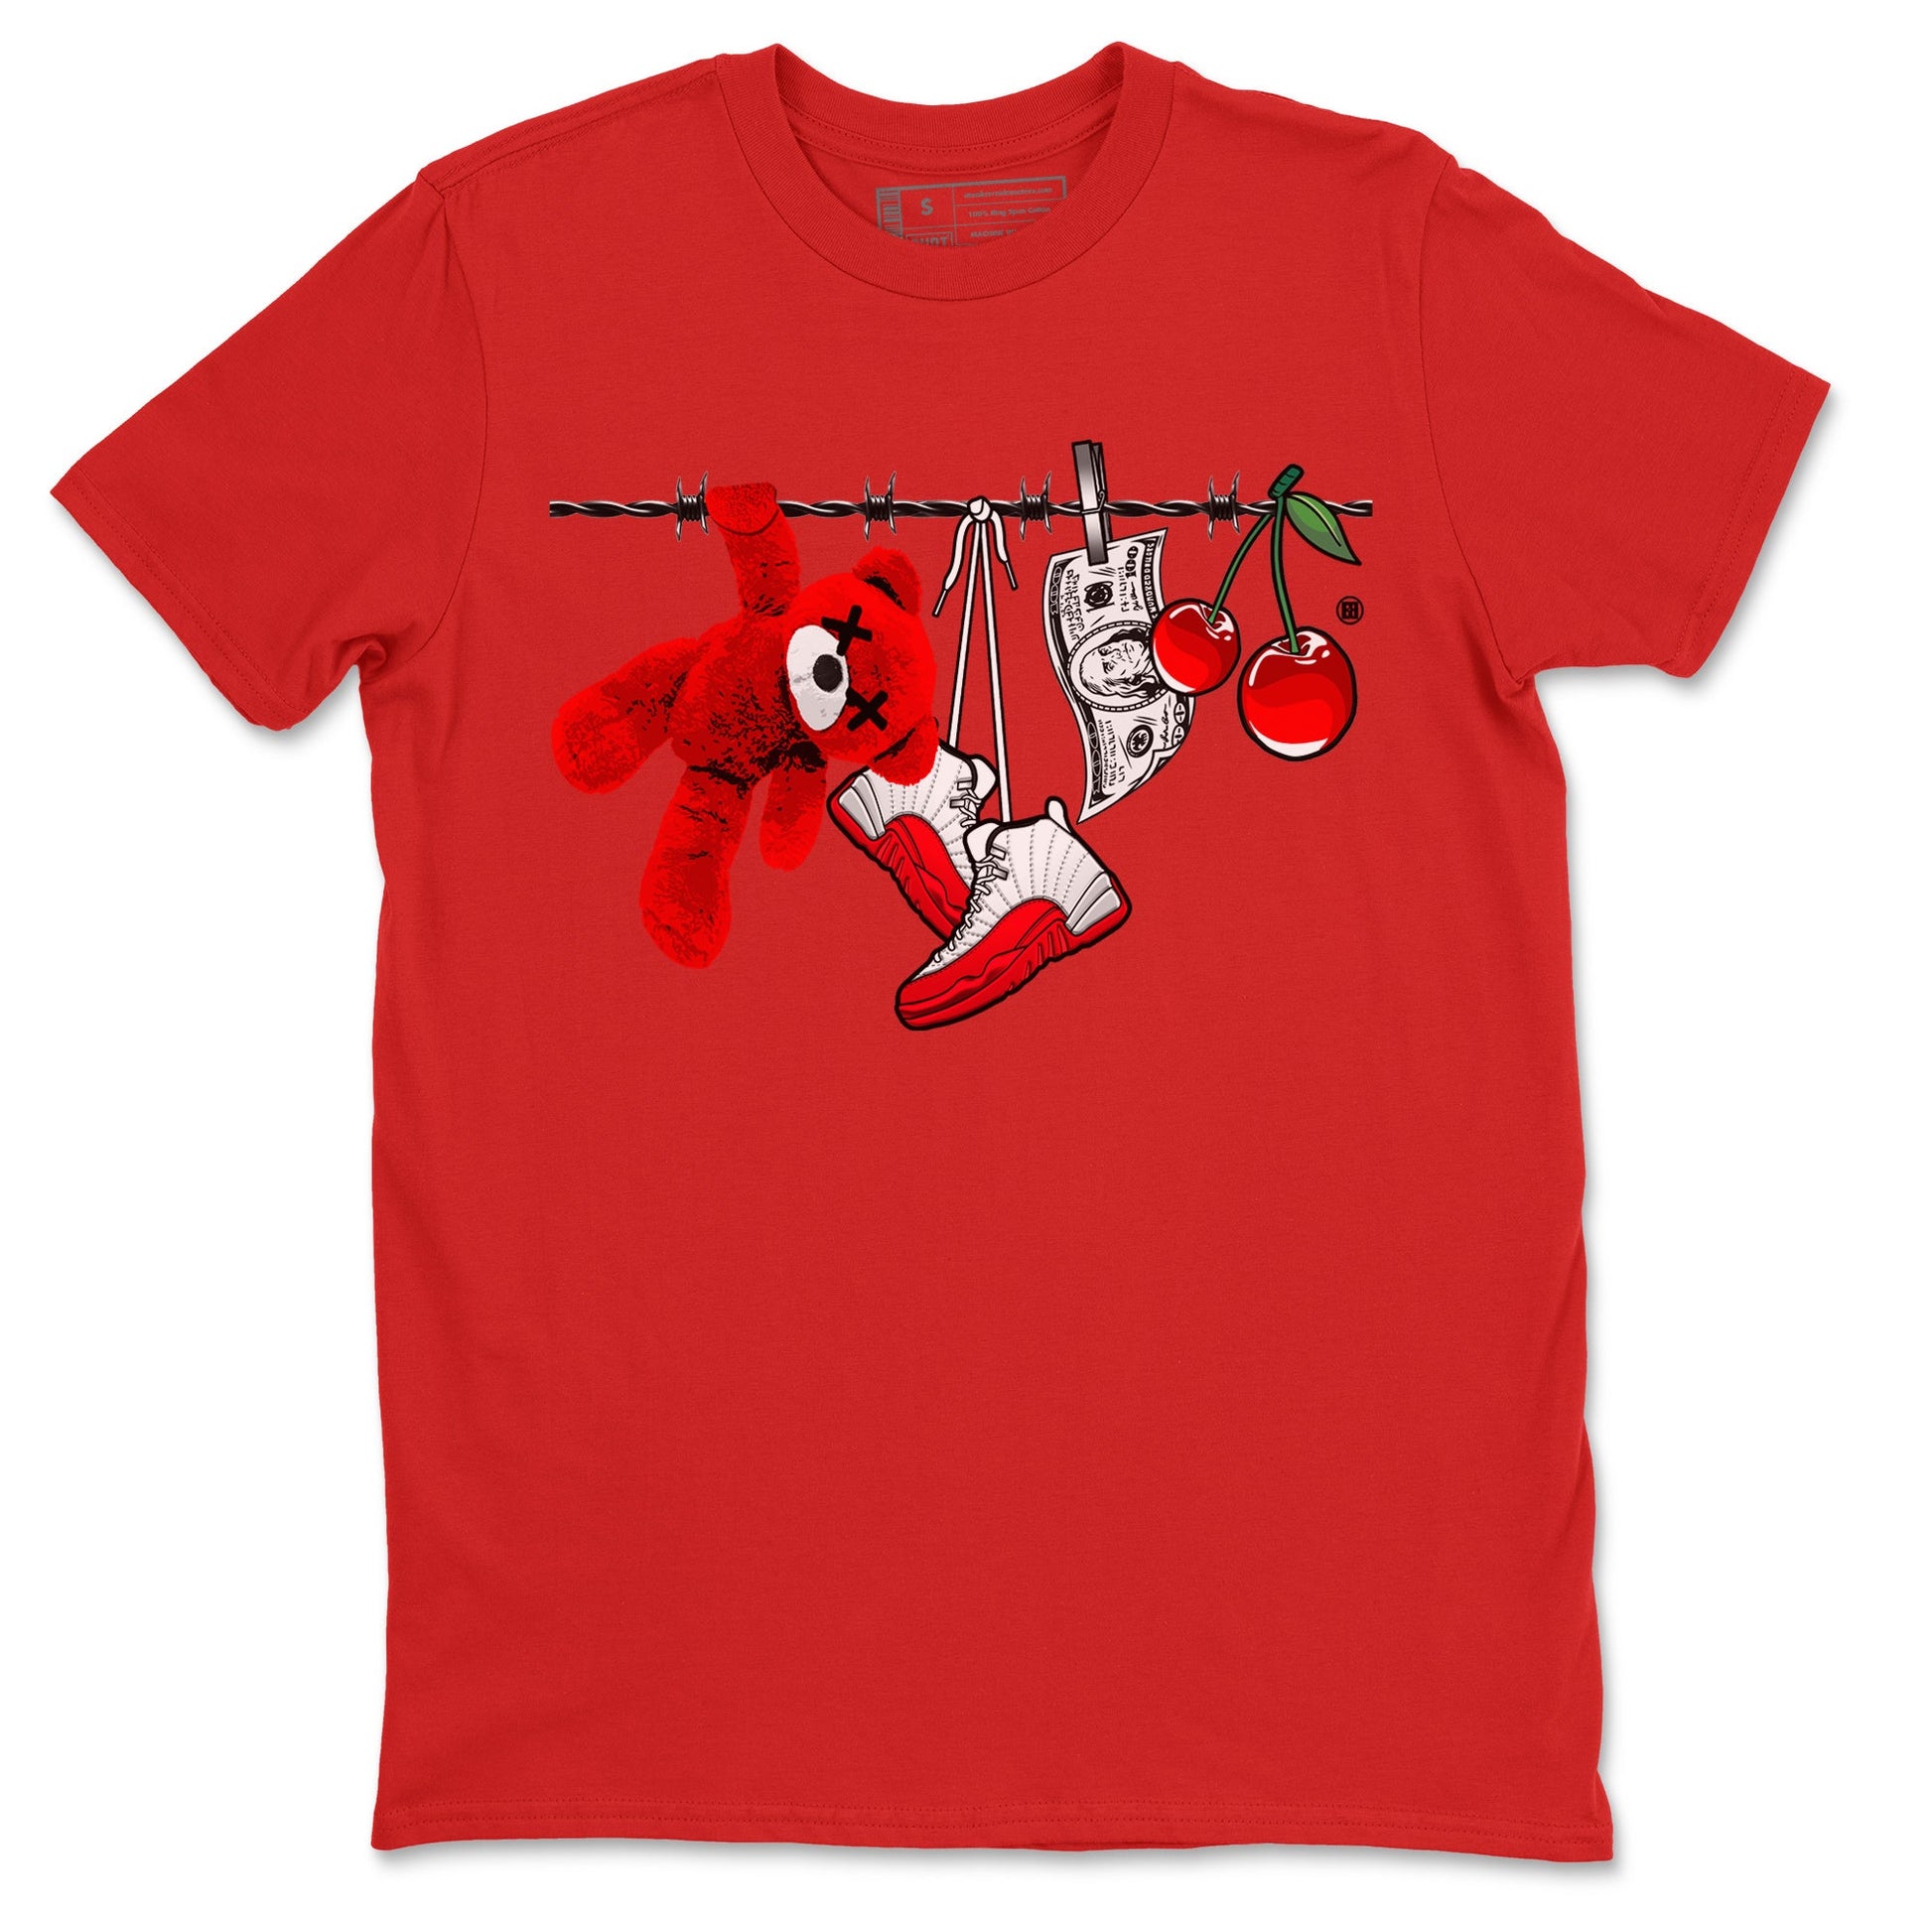 12s Cherry Sneaker Match Tees Clothesline Sneaker Tees Air Jordan 12 Cherry Sneaker Release Tees Unisex Shirts Red 2